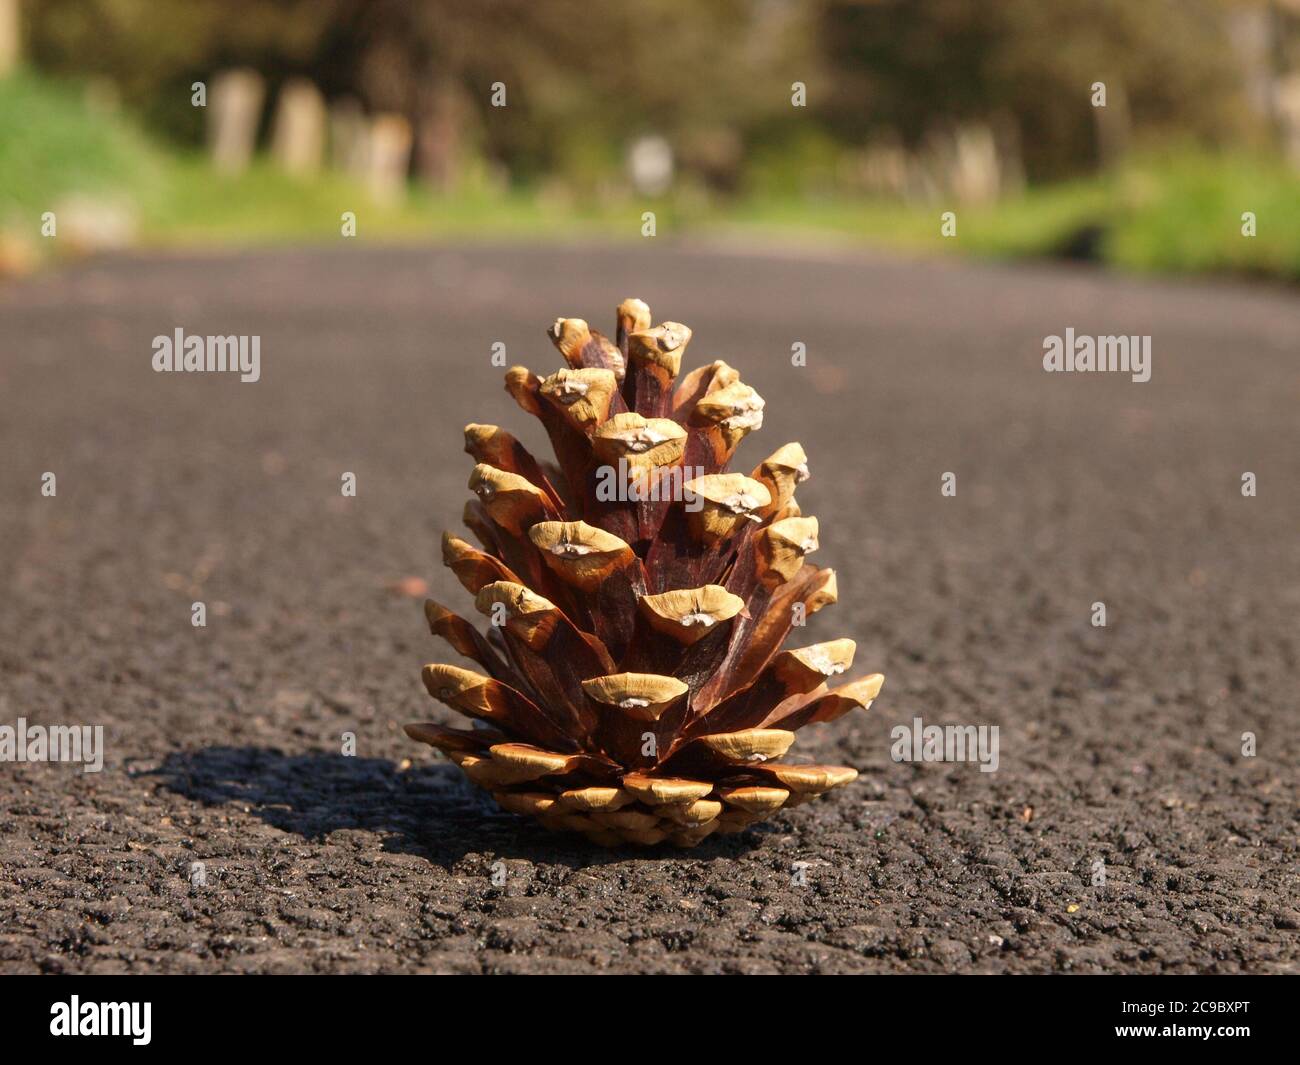 Pine cone on a path Stock Photo